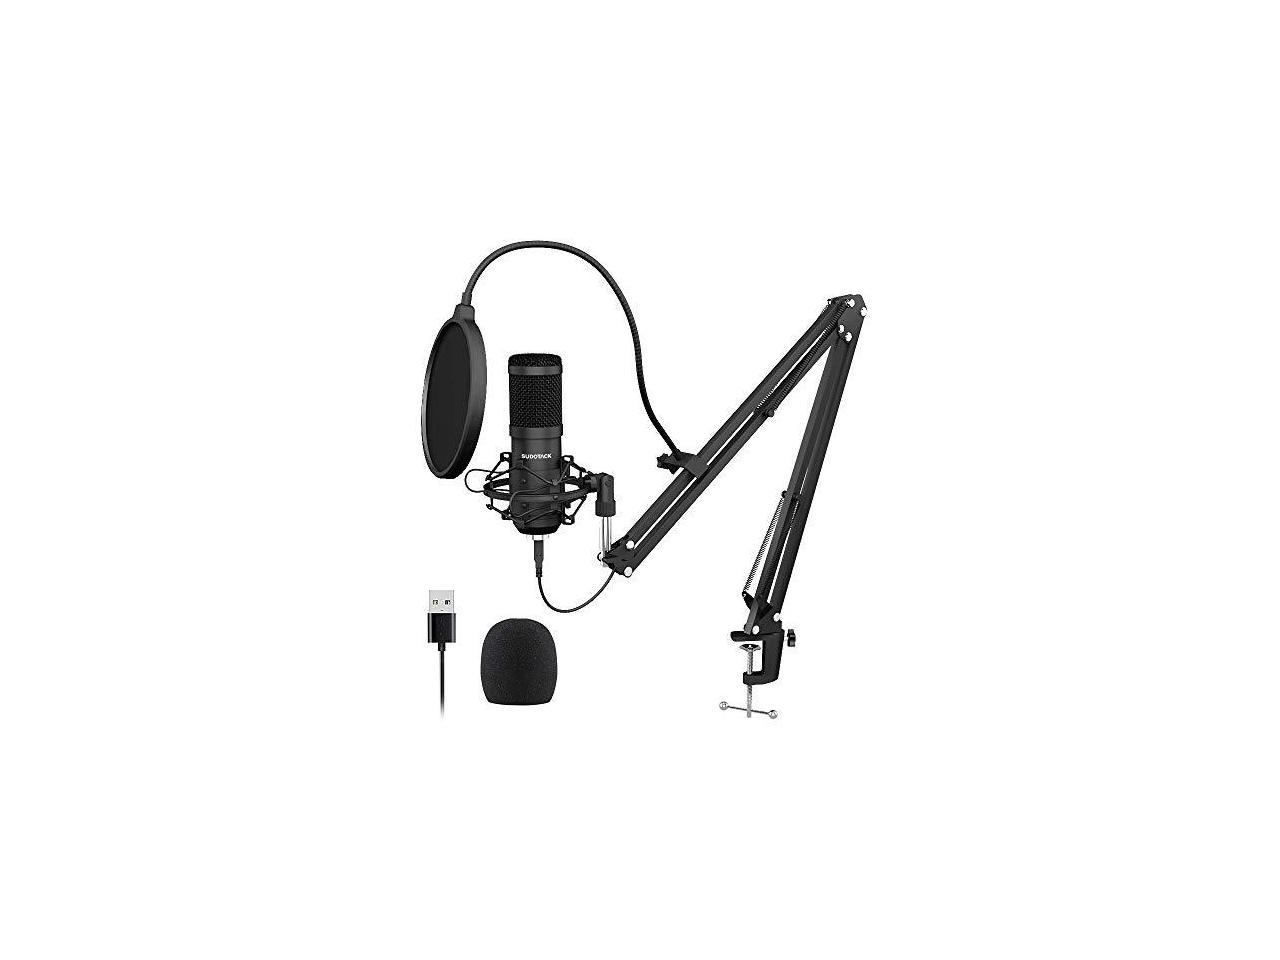 Studio Mic Compatible with Mac Laptop Desktop USB Streaming Podcast PC Microphone Computer Cardioid Condenser Microphones Kit with Boom Arm for Vocal Instrument Recording Gaming YouTube Karaoke 